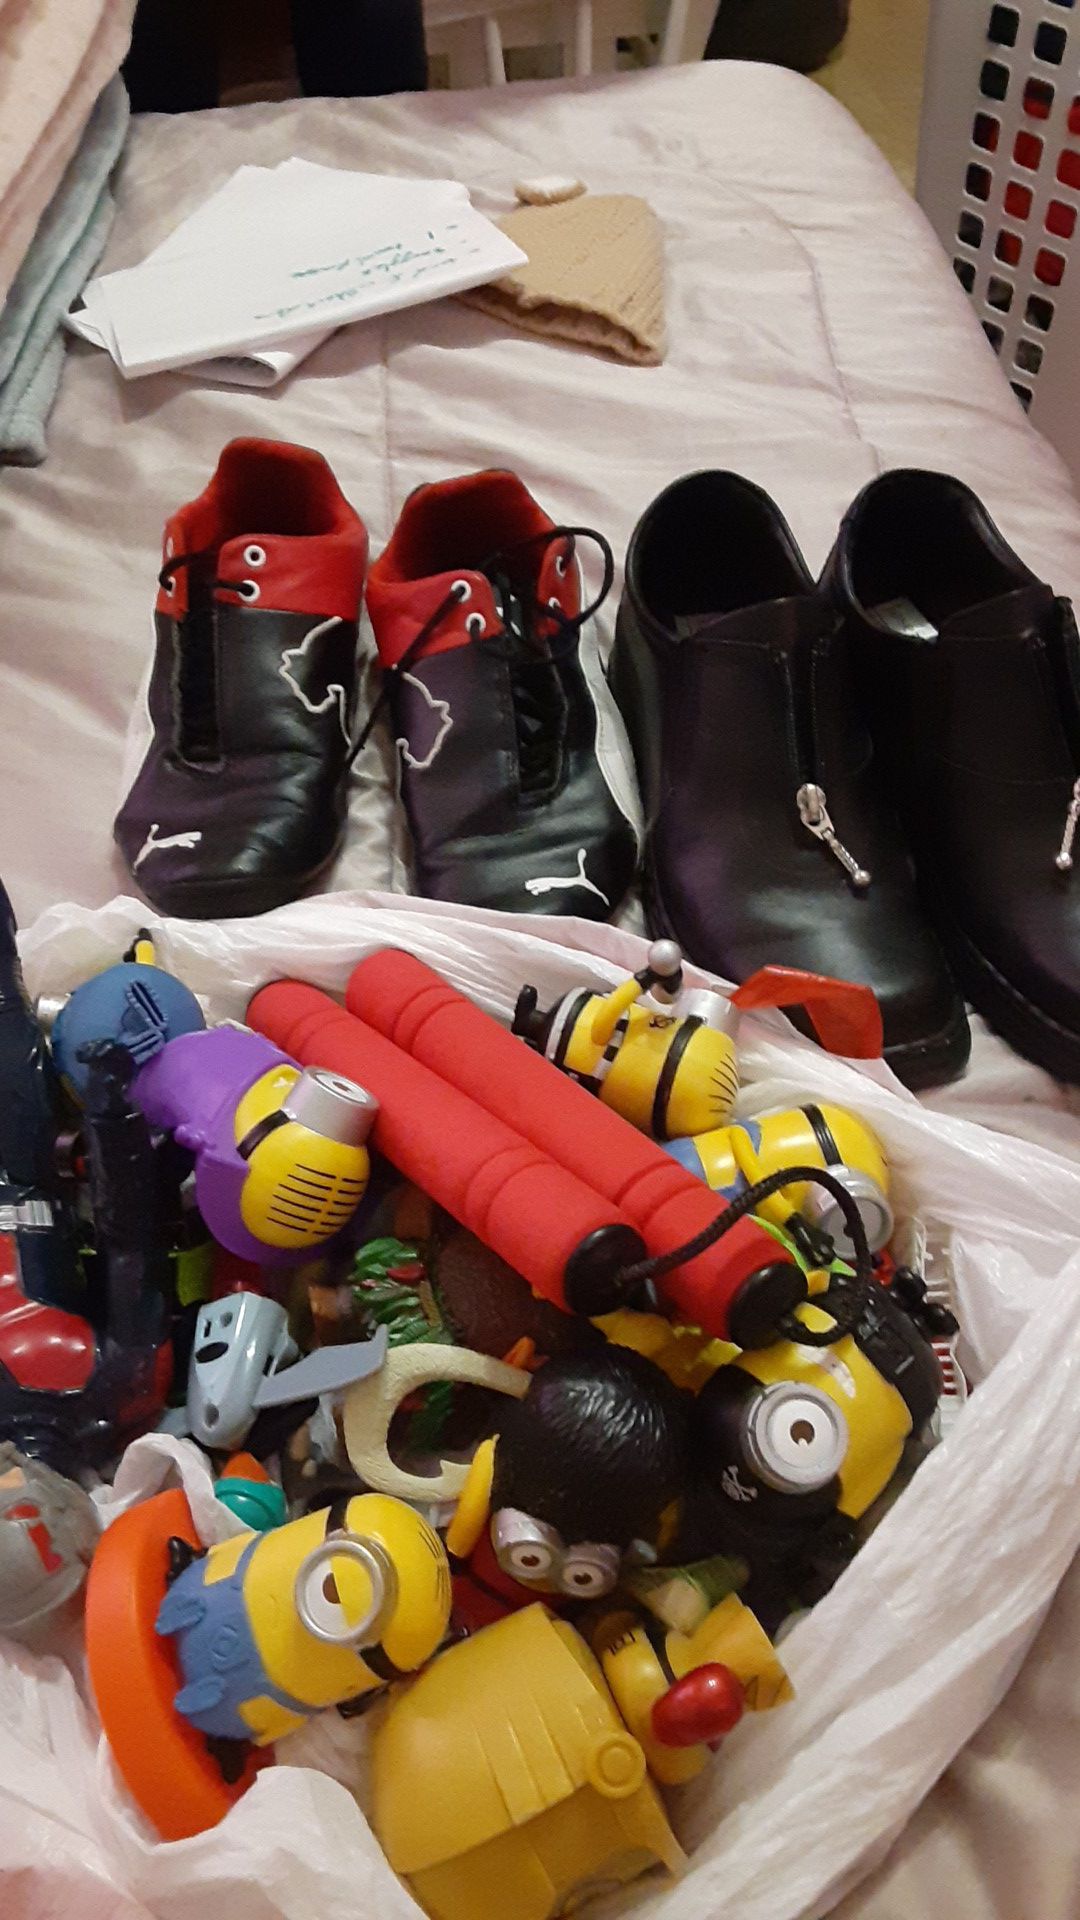 Kids toys and shoes